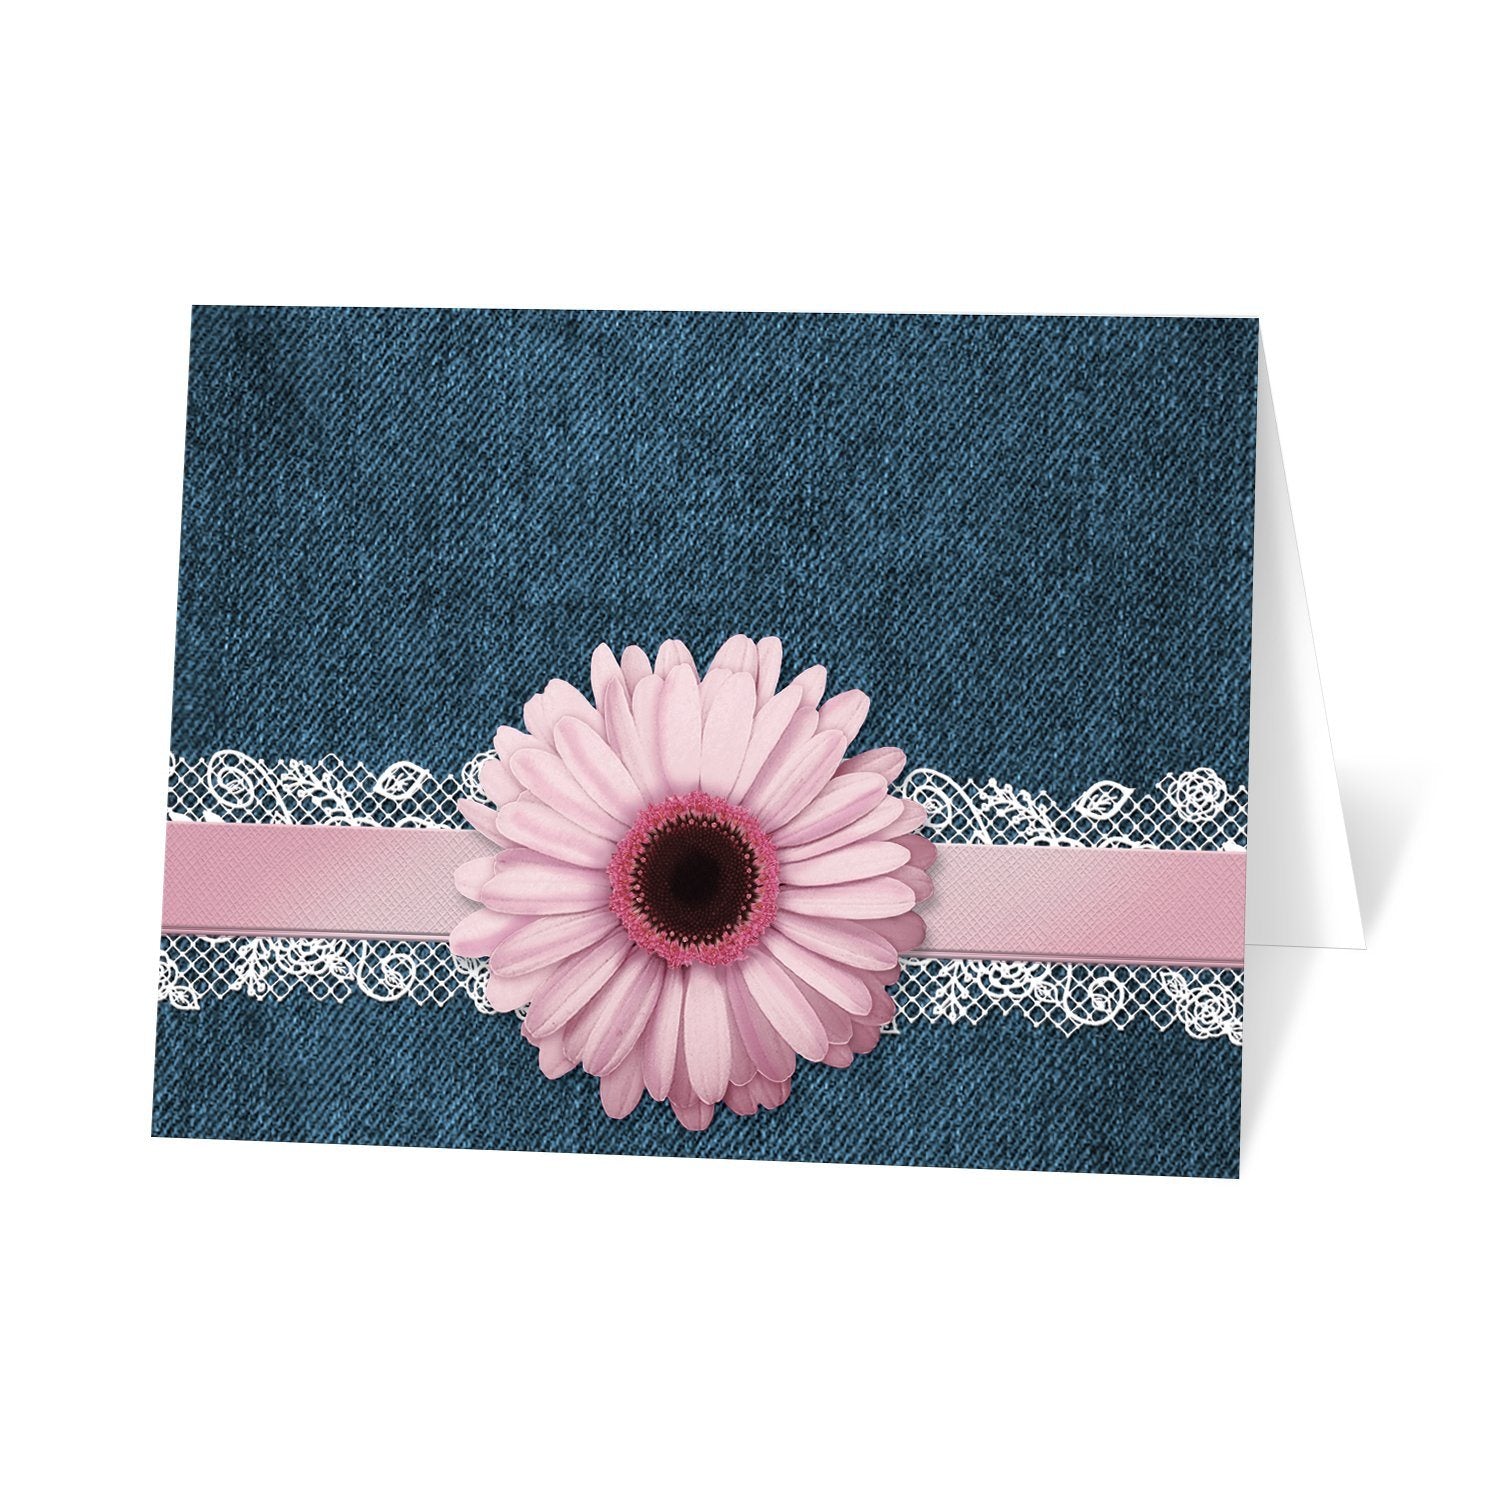 Pink Daisy Lace Rustic Denim Note Cards at Artistically Invited - denim and lace thank you cards